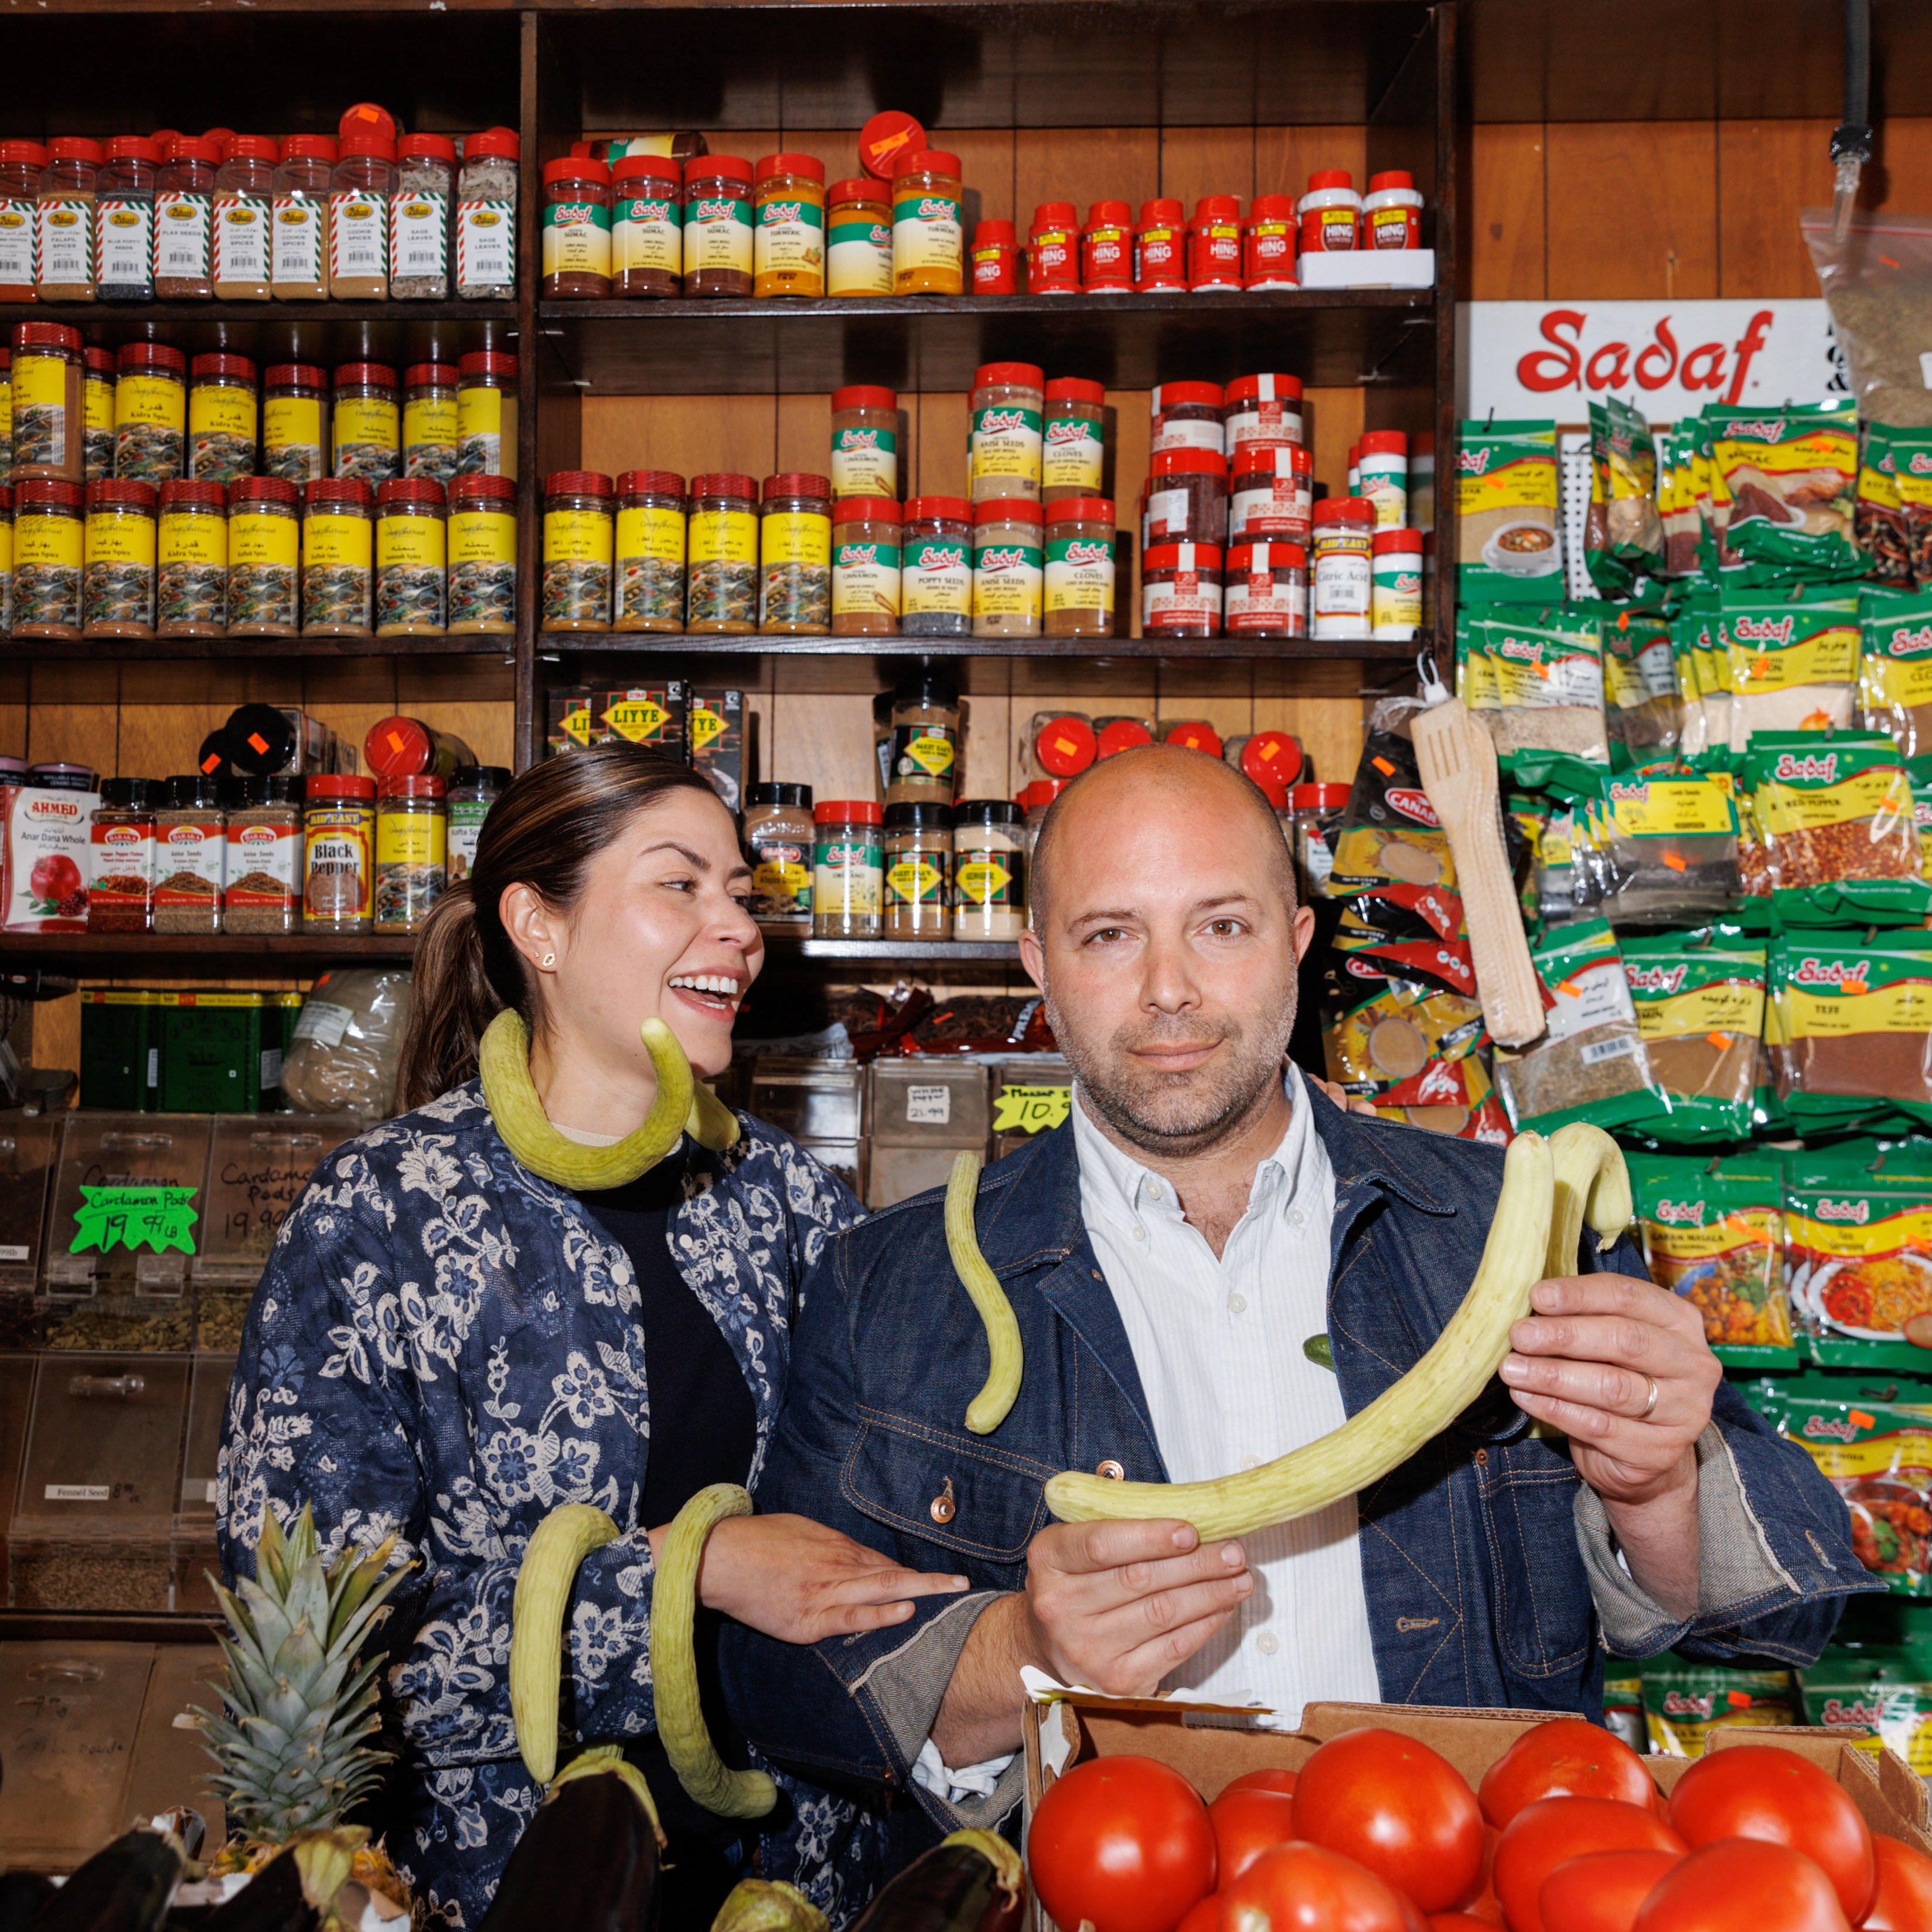 A woman and a bald man stand in a colorful grocery store aisle with spices behind them. The man holds a long vegetable, and both have playful expressions.